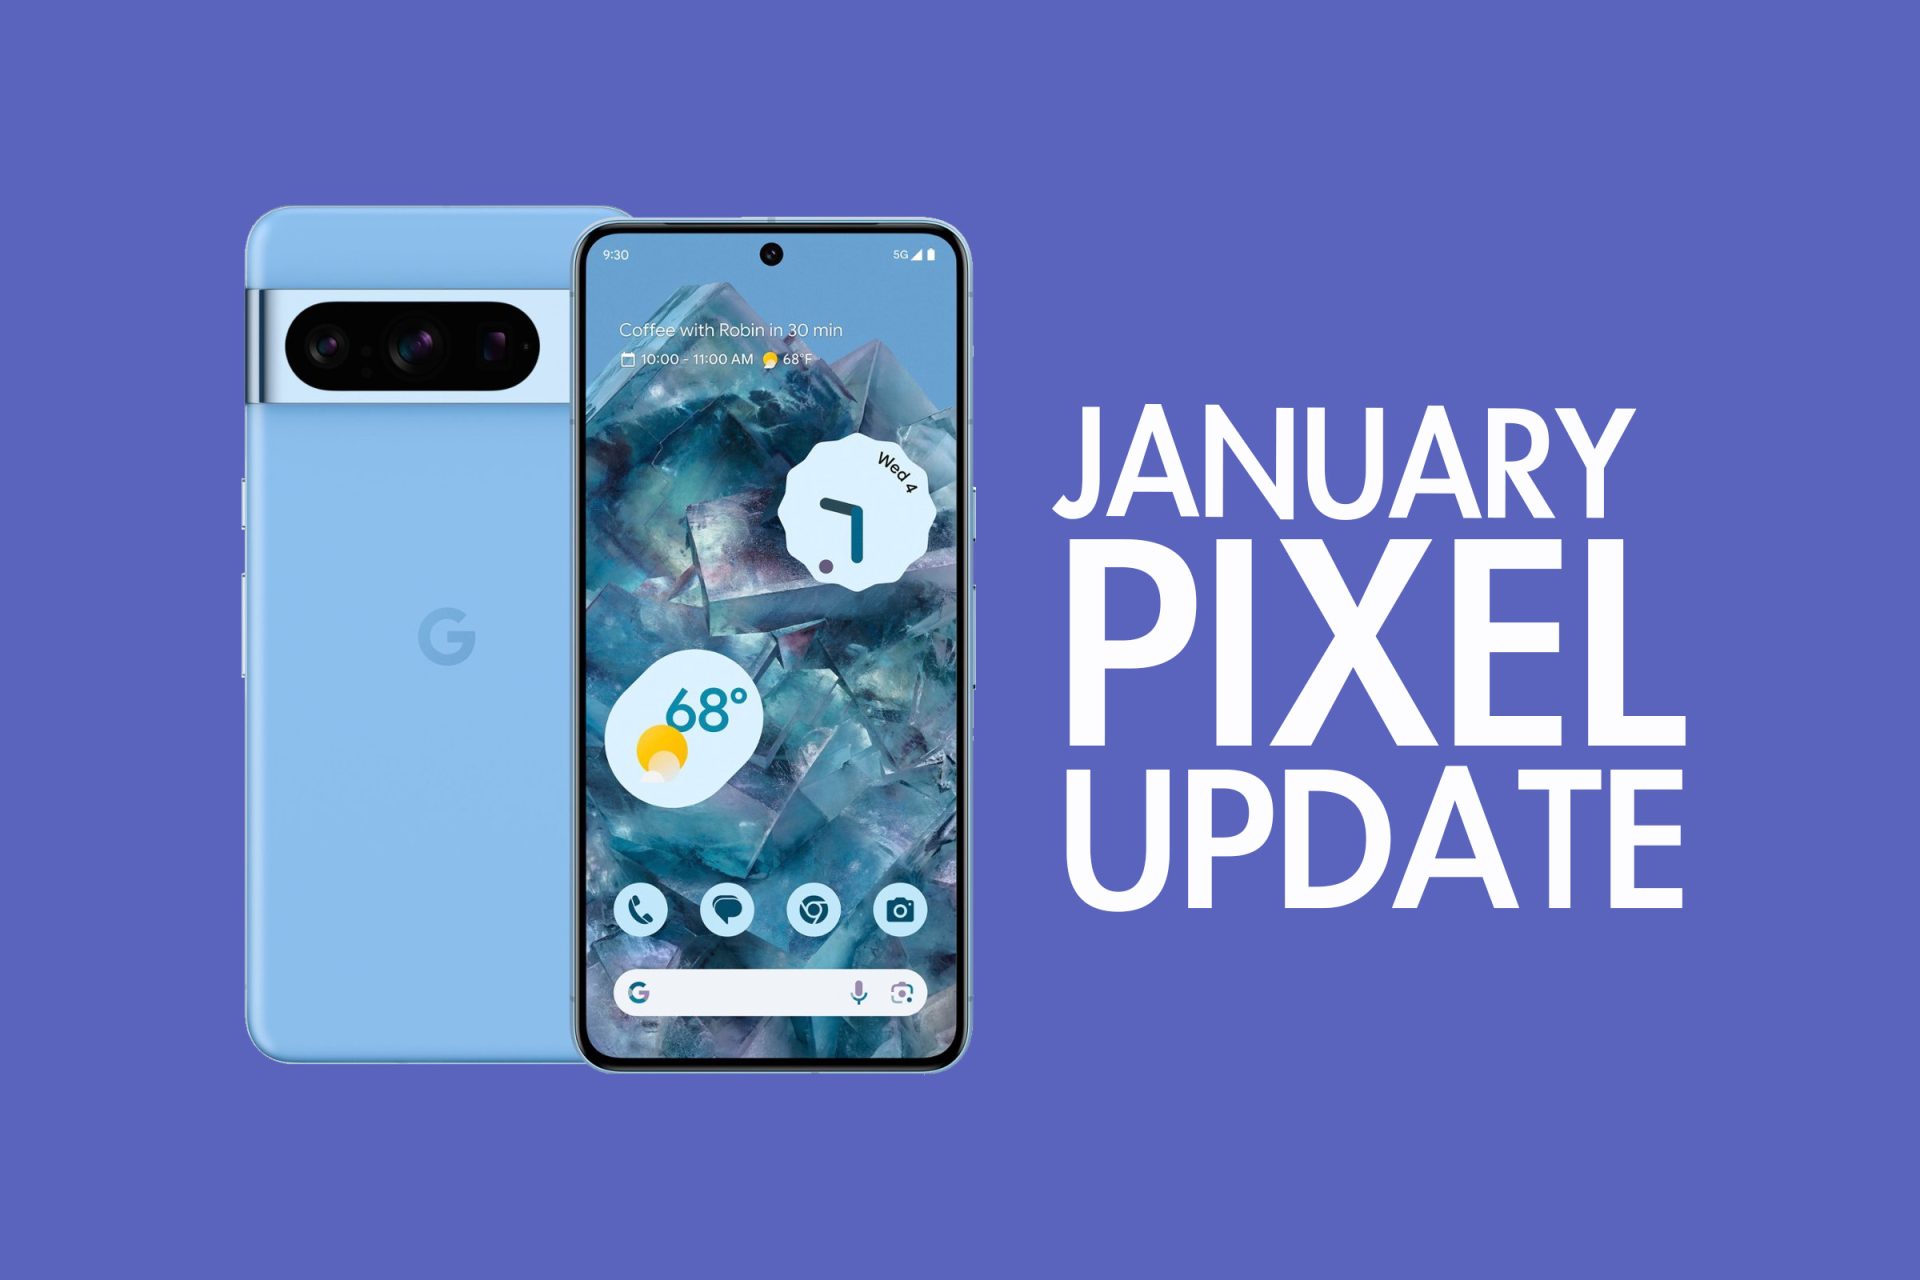 Your Google Pixel Phone's January Update Arrived